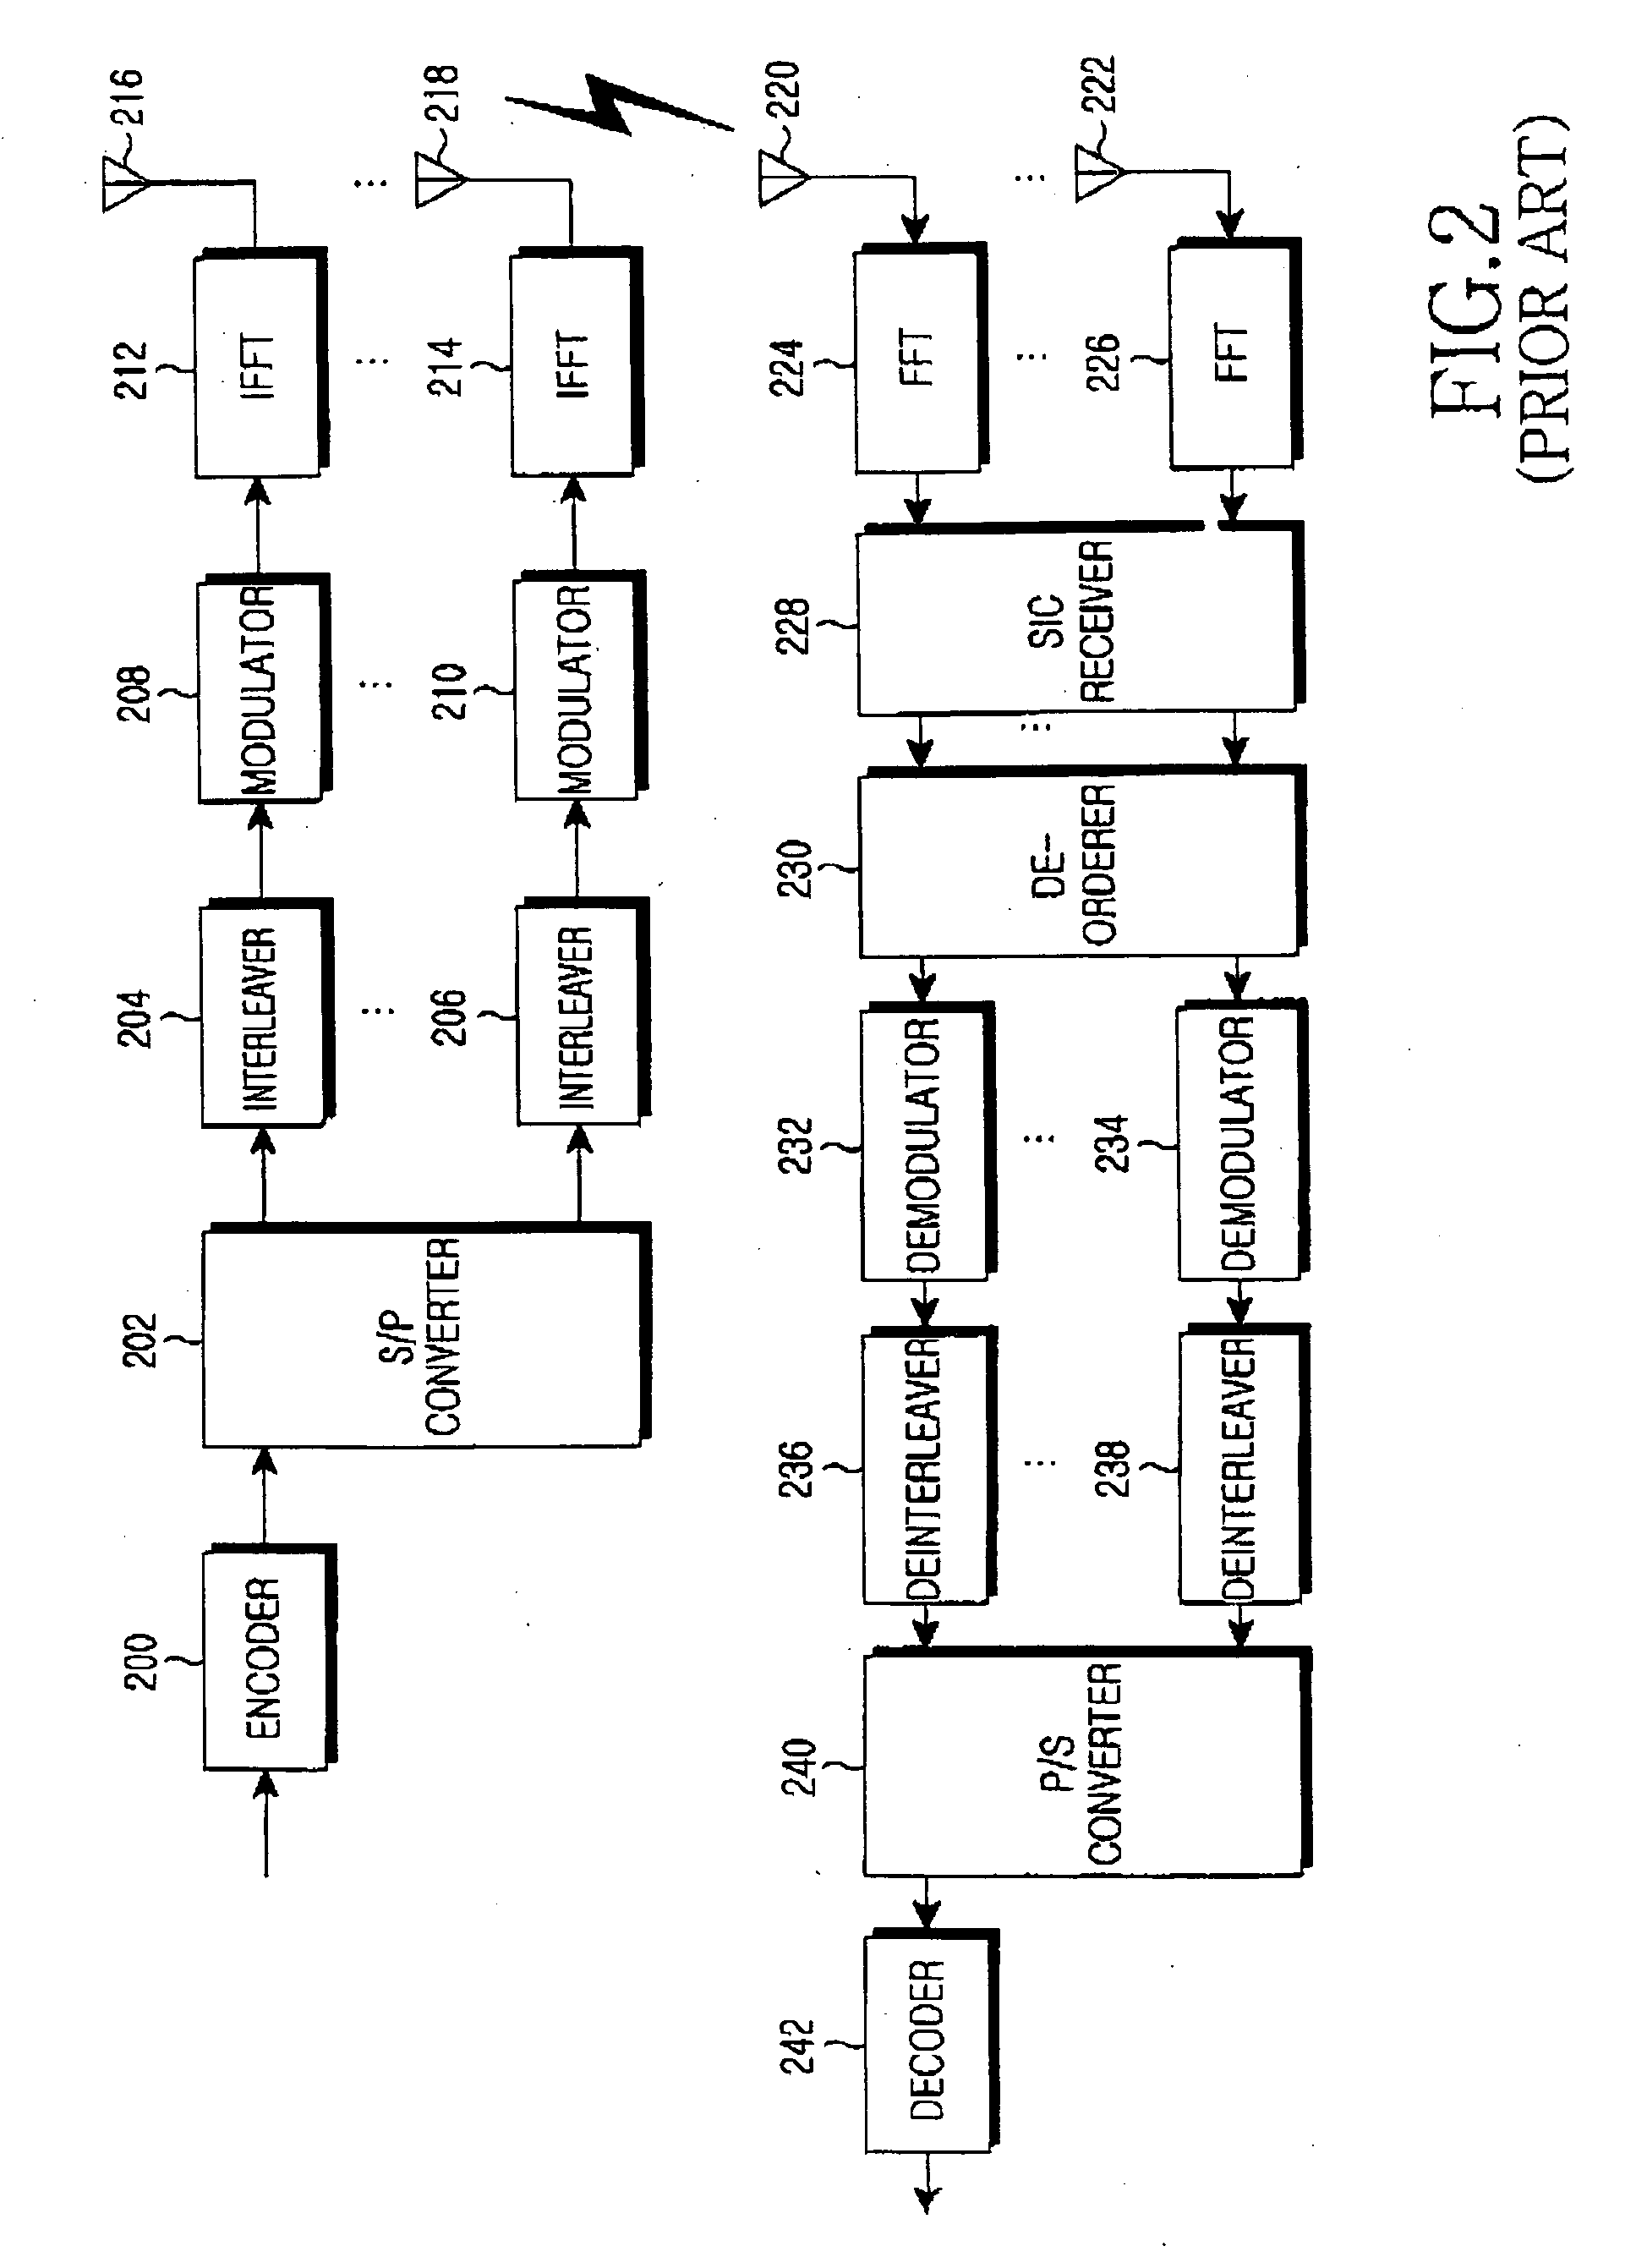 Apparatus and method for canceling interference signal in an orthogonal frequency division multiplexing system using multiple antennas